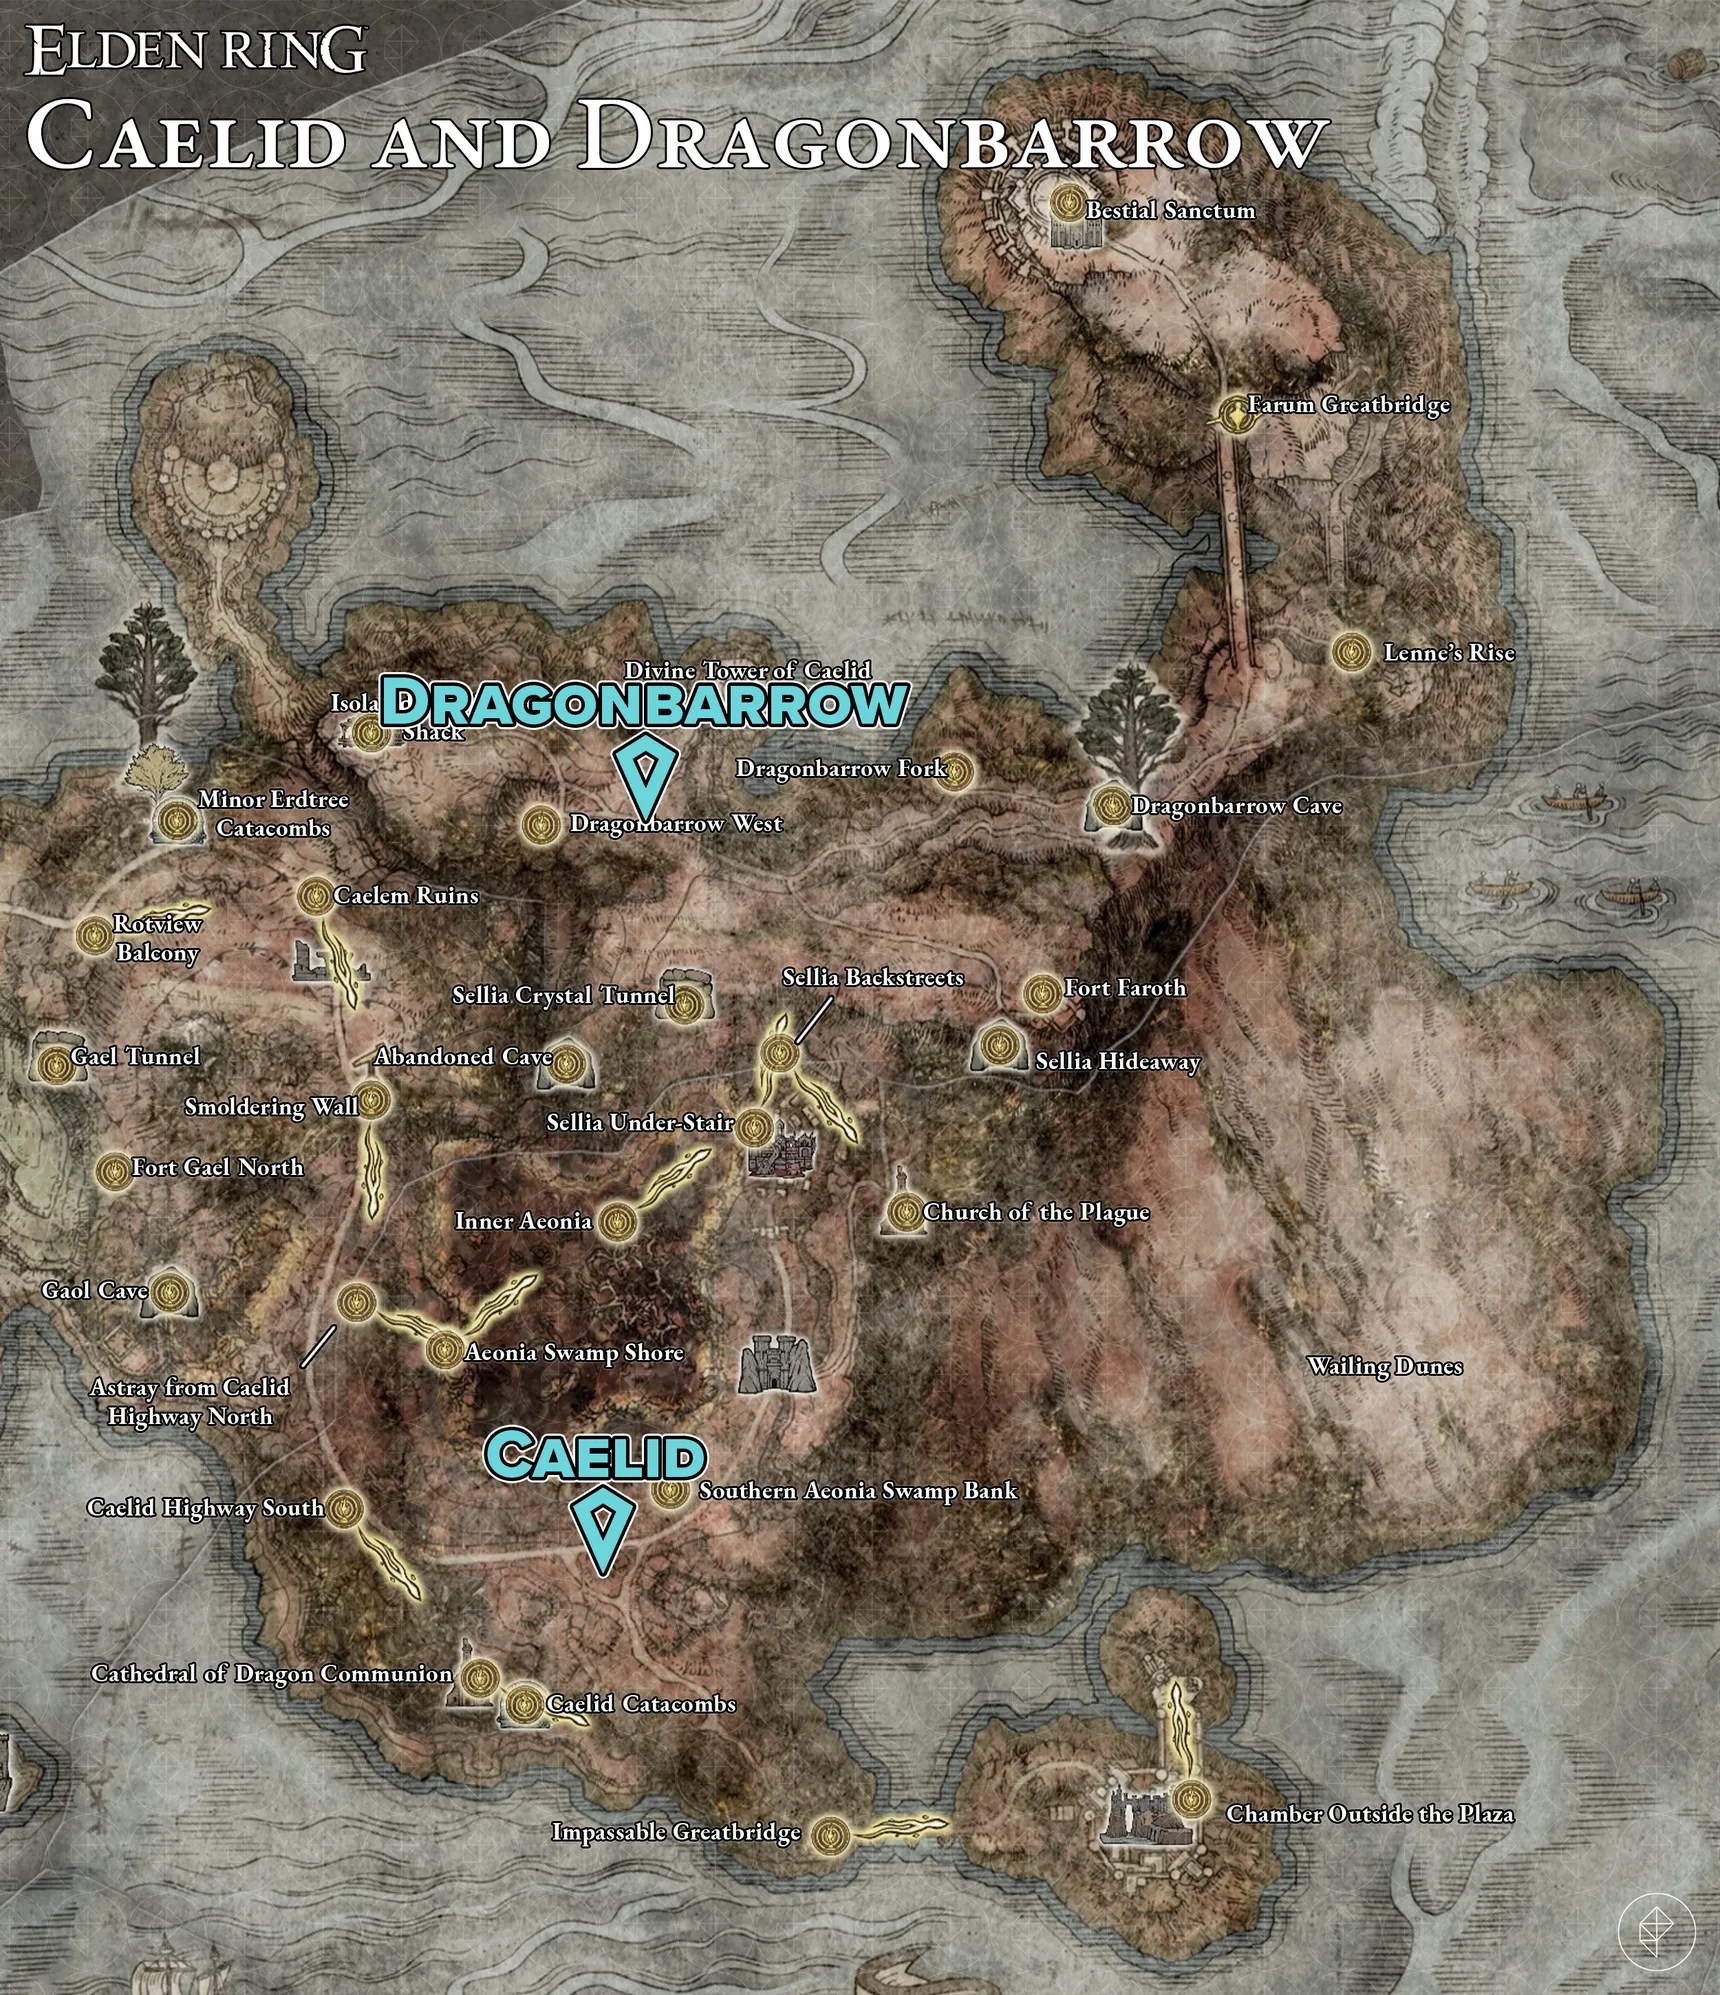 CAELID AND DRAGONBARROW MAP FRAGMENT STELE LOCATIONS